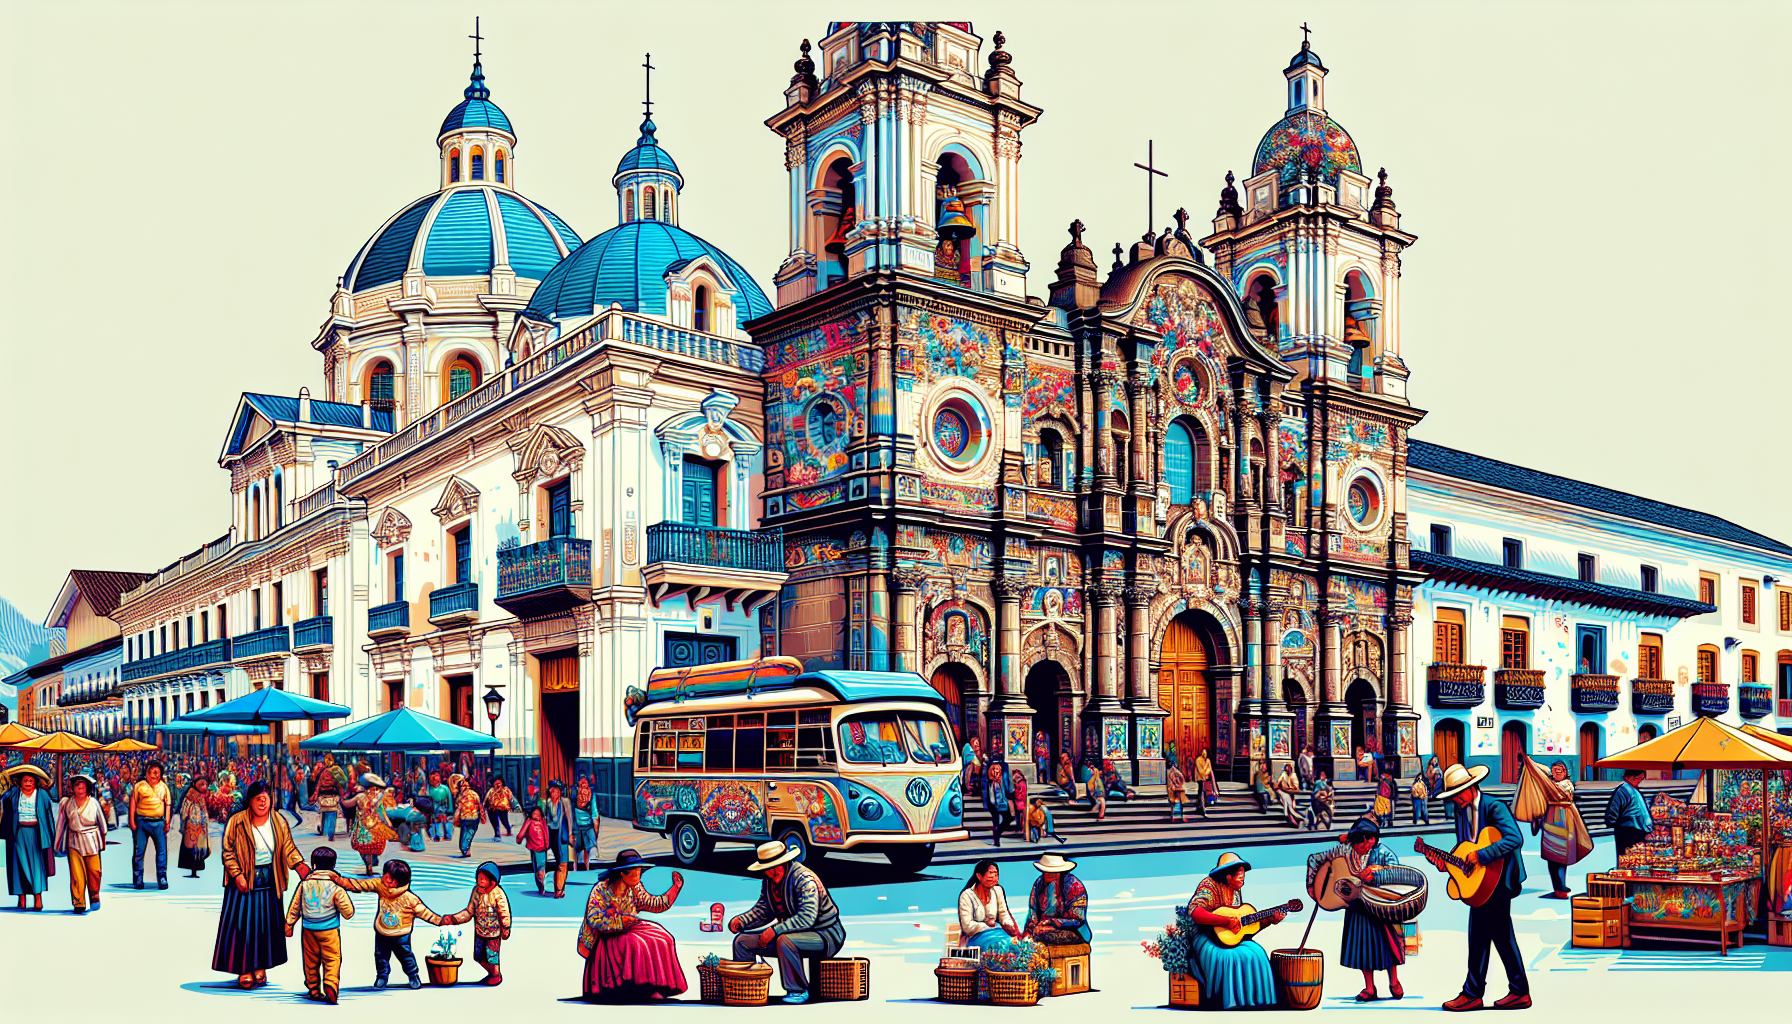 Create an image of the beautiful colonial churches in Quito, Ecuador, showcasing their stunning architecture. Highlight the intricate details of churches like La Compañía de Jesús with its ornate baro